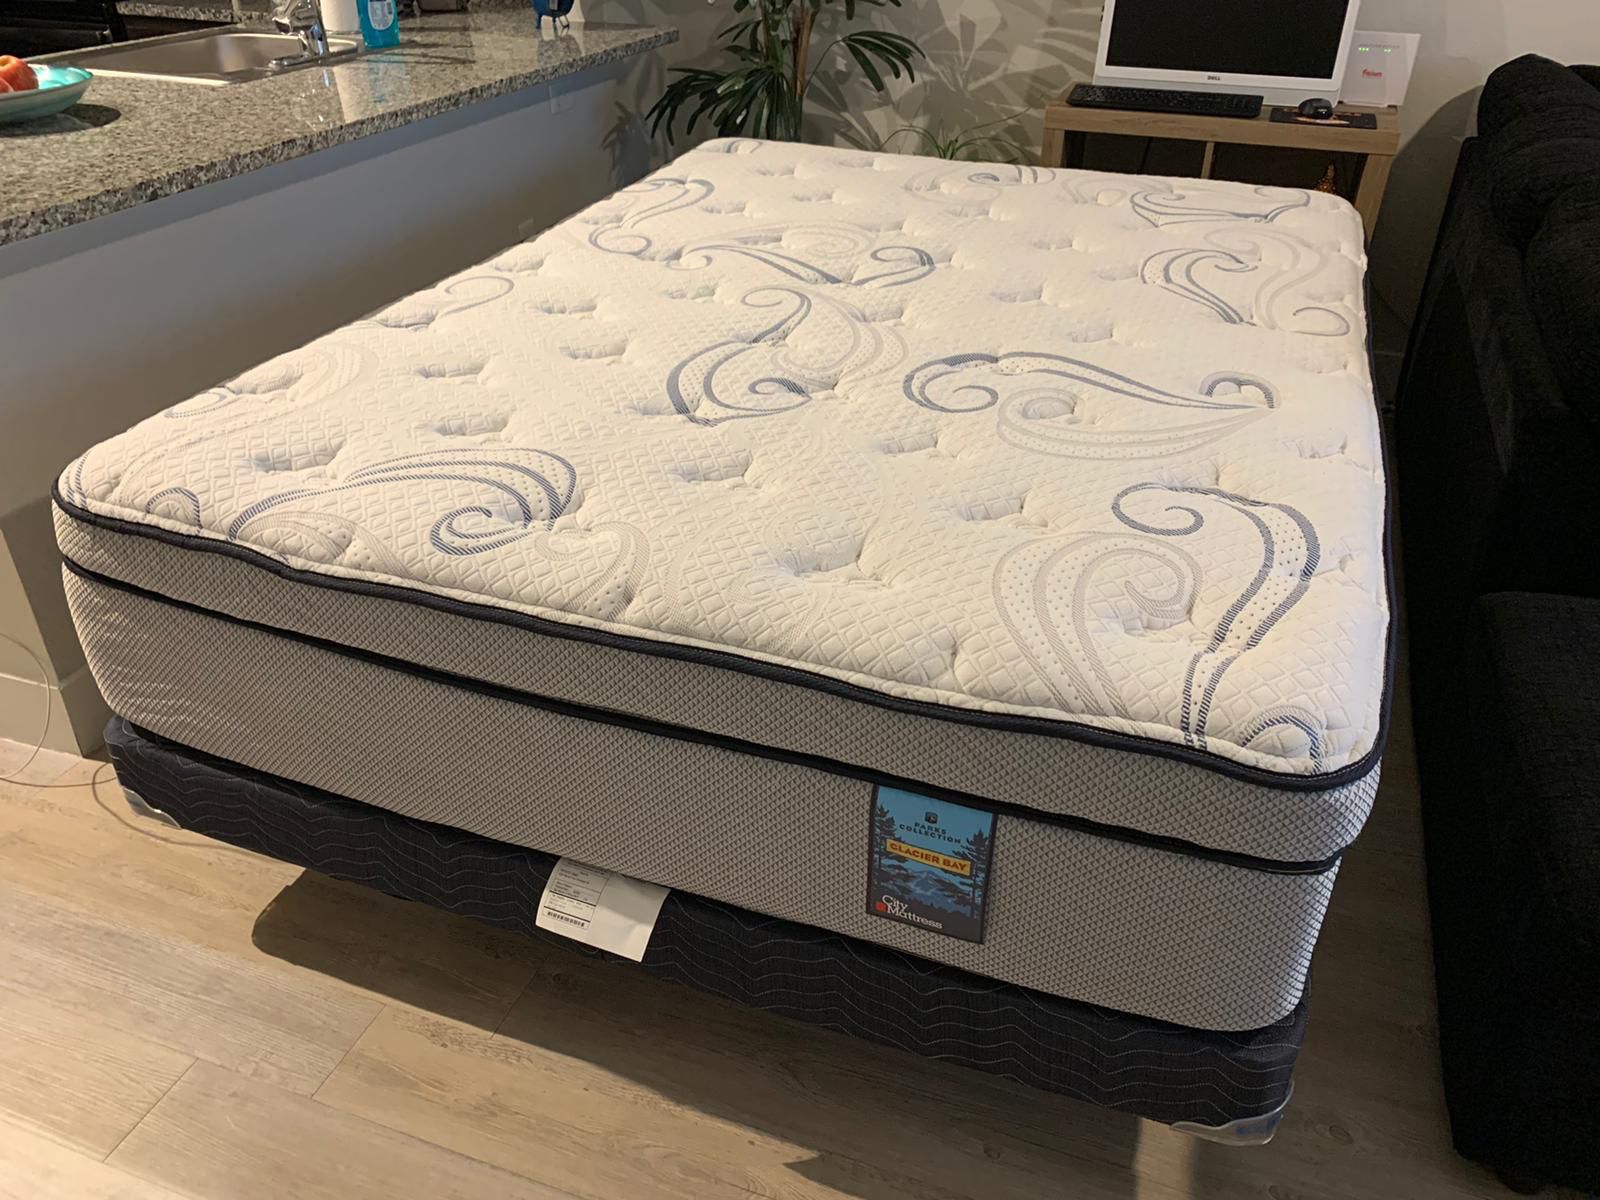 14” HIGH QUALITY CITY MATTRESS GLACIER BAY PILLOW TOP MATTRESS WITH BOX SPRING AND METAL FRAME